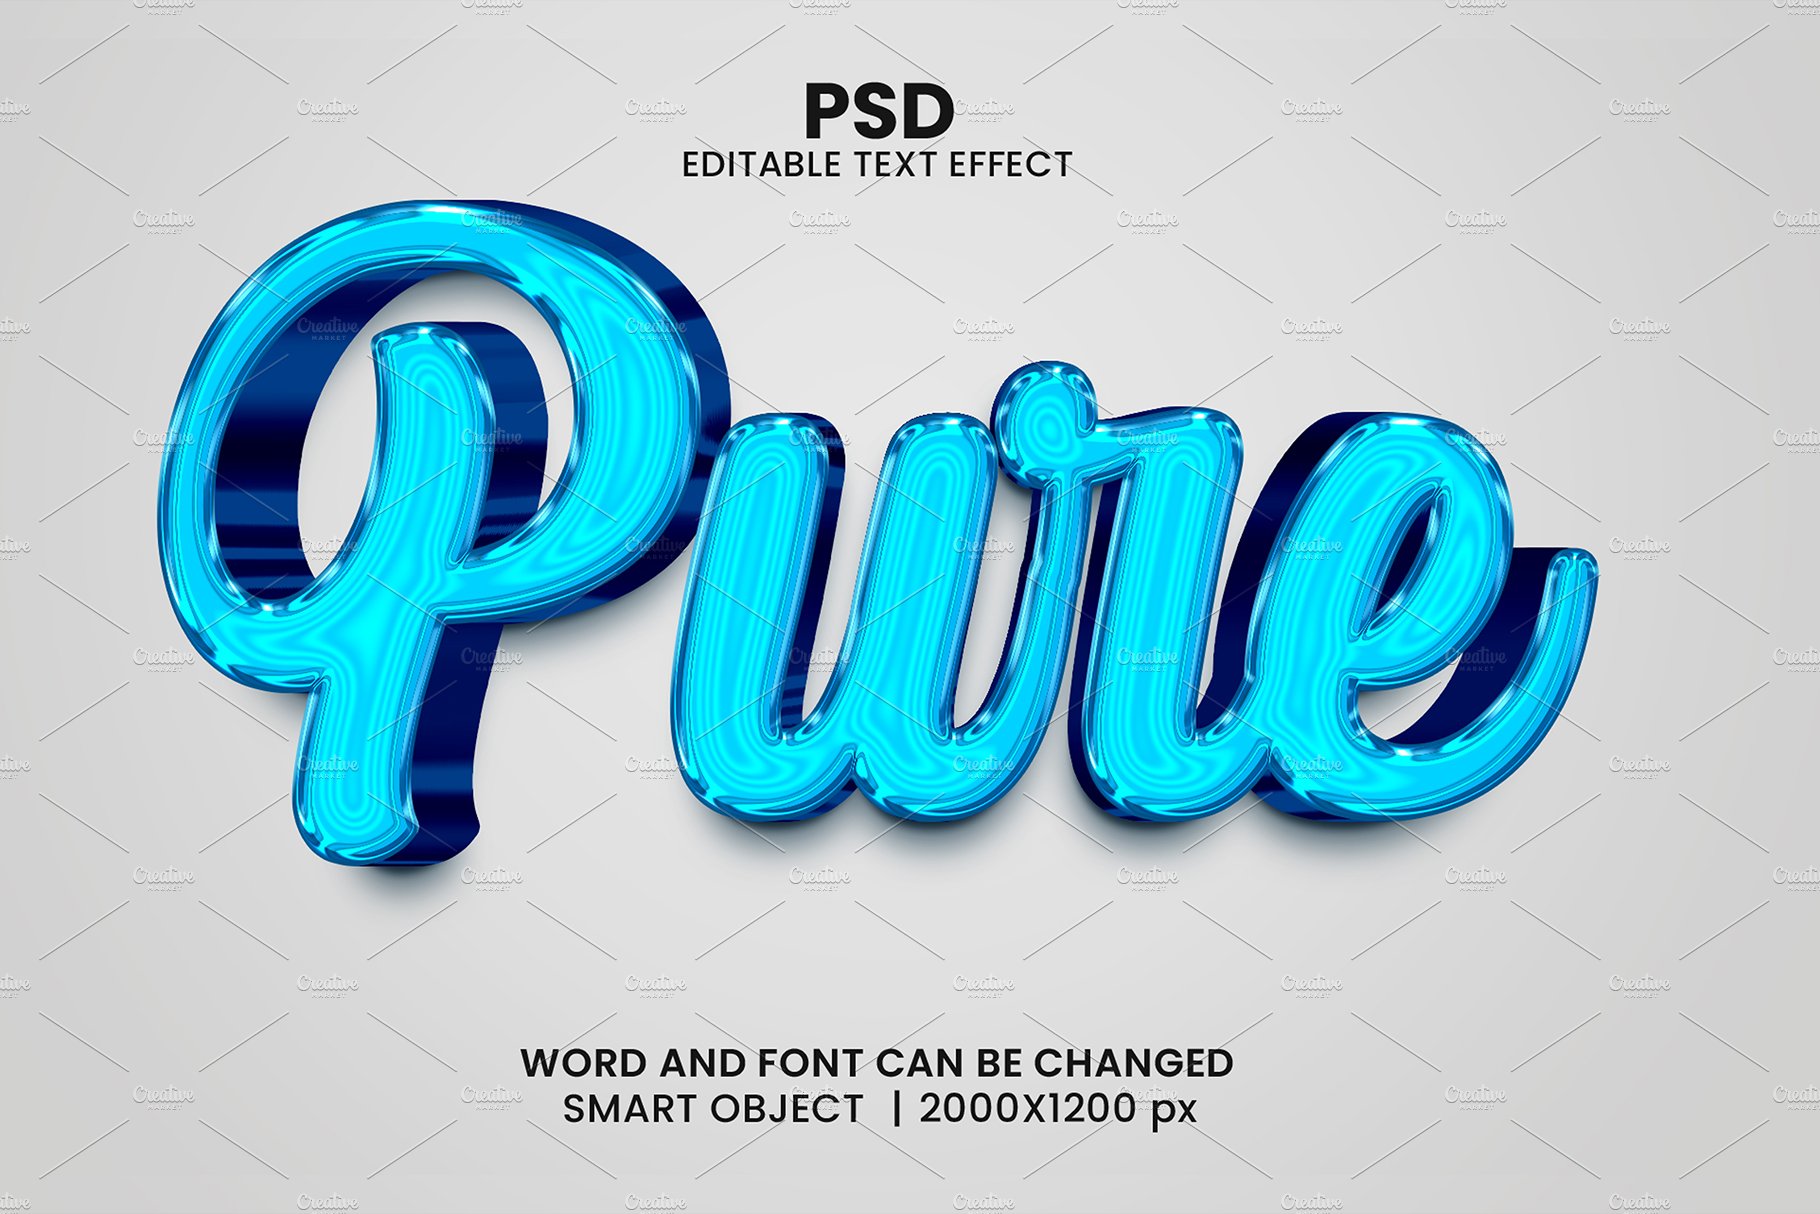 Pure 3d Editable Psd Text Effectcover image.